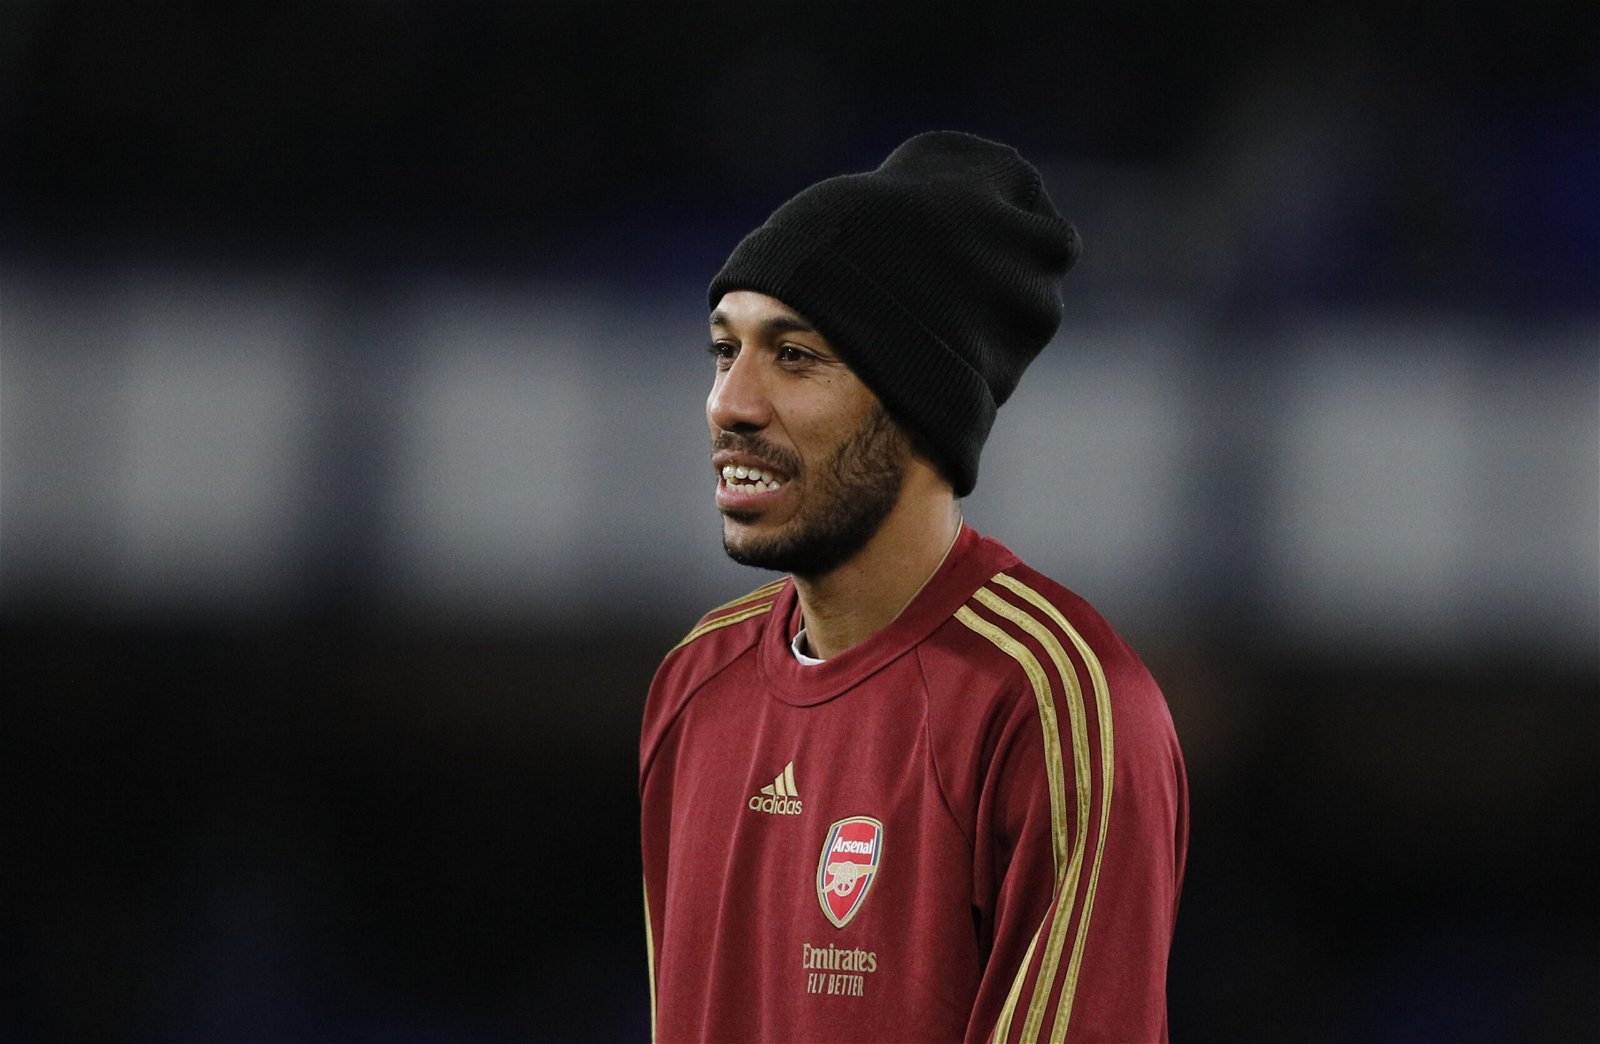 Pierre-Emerick Aubameyang warms up for Arsenal